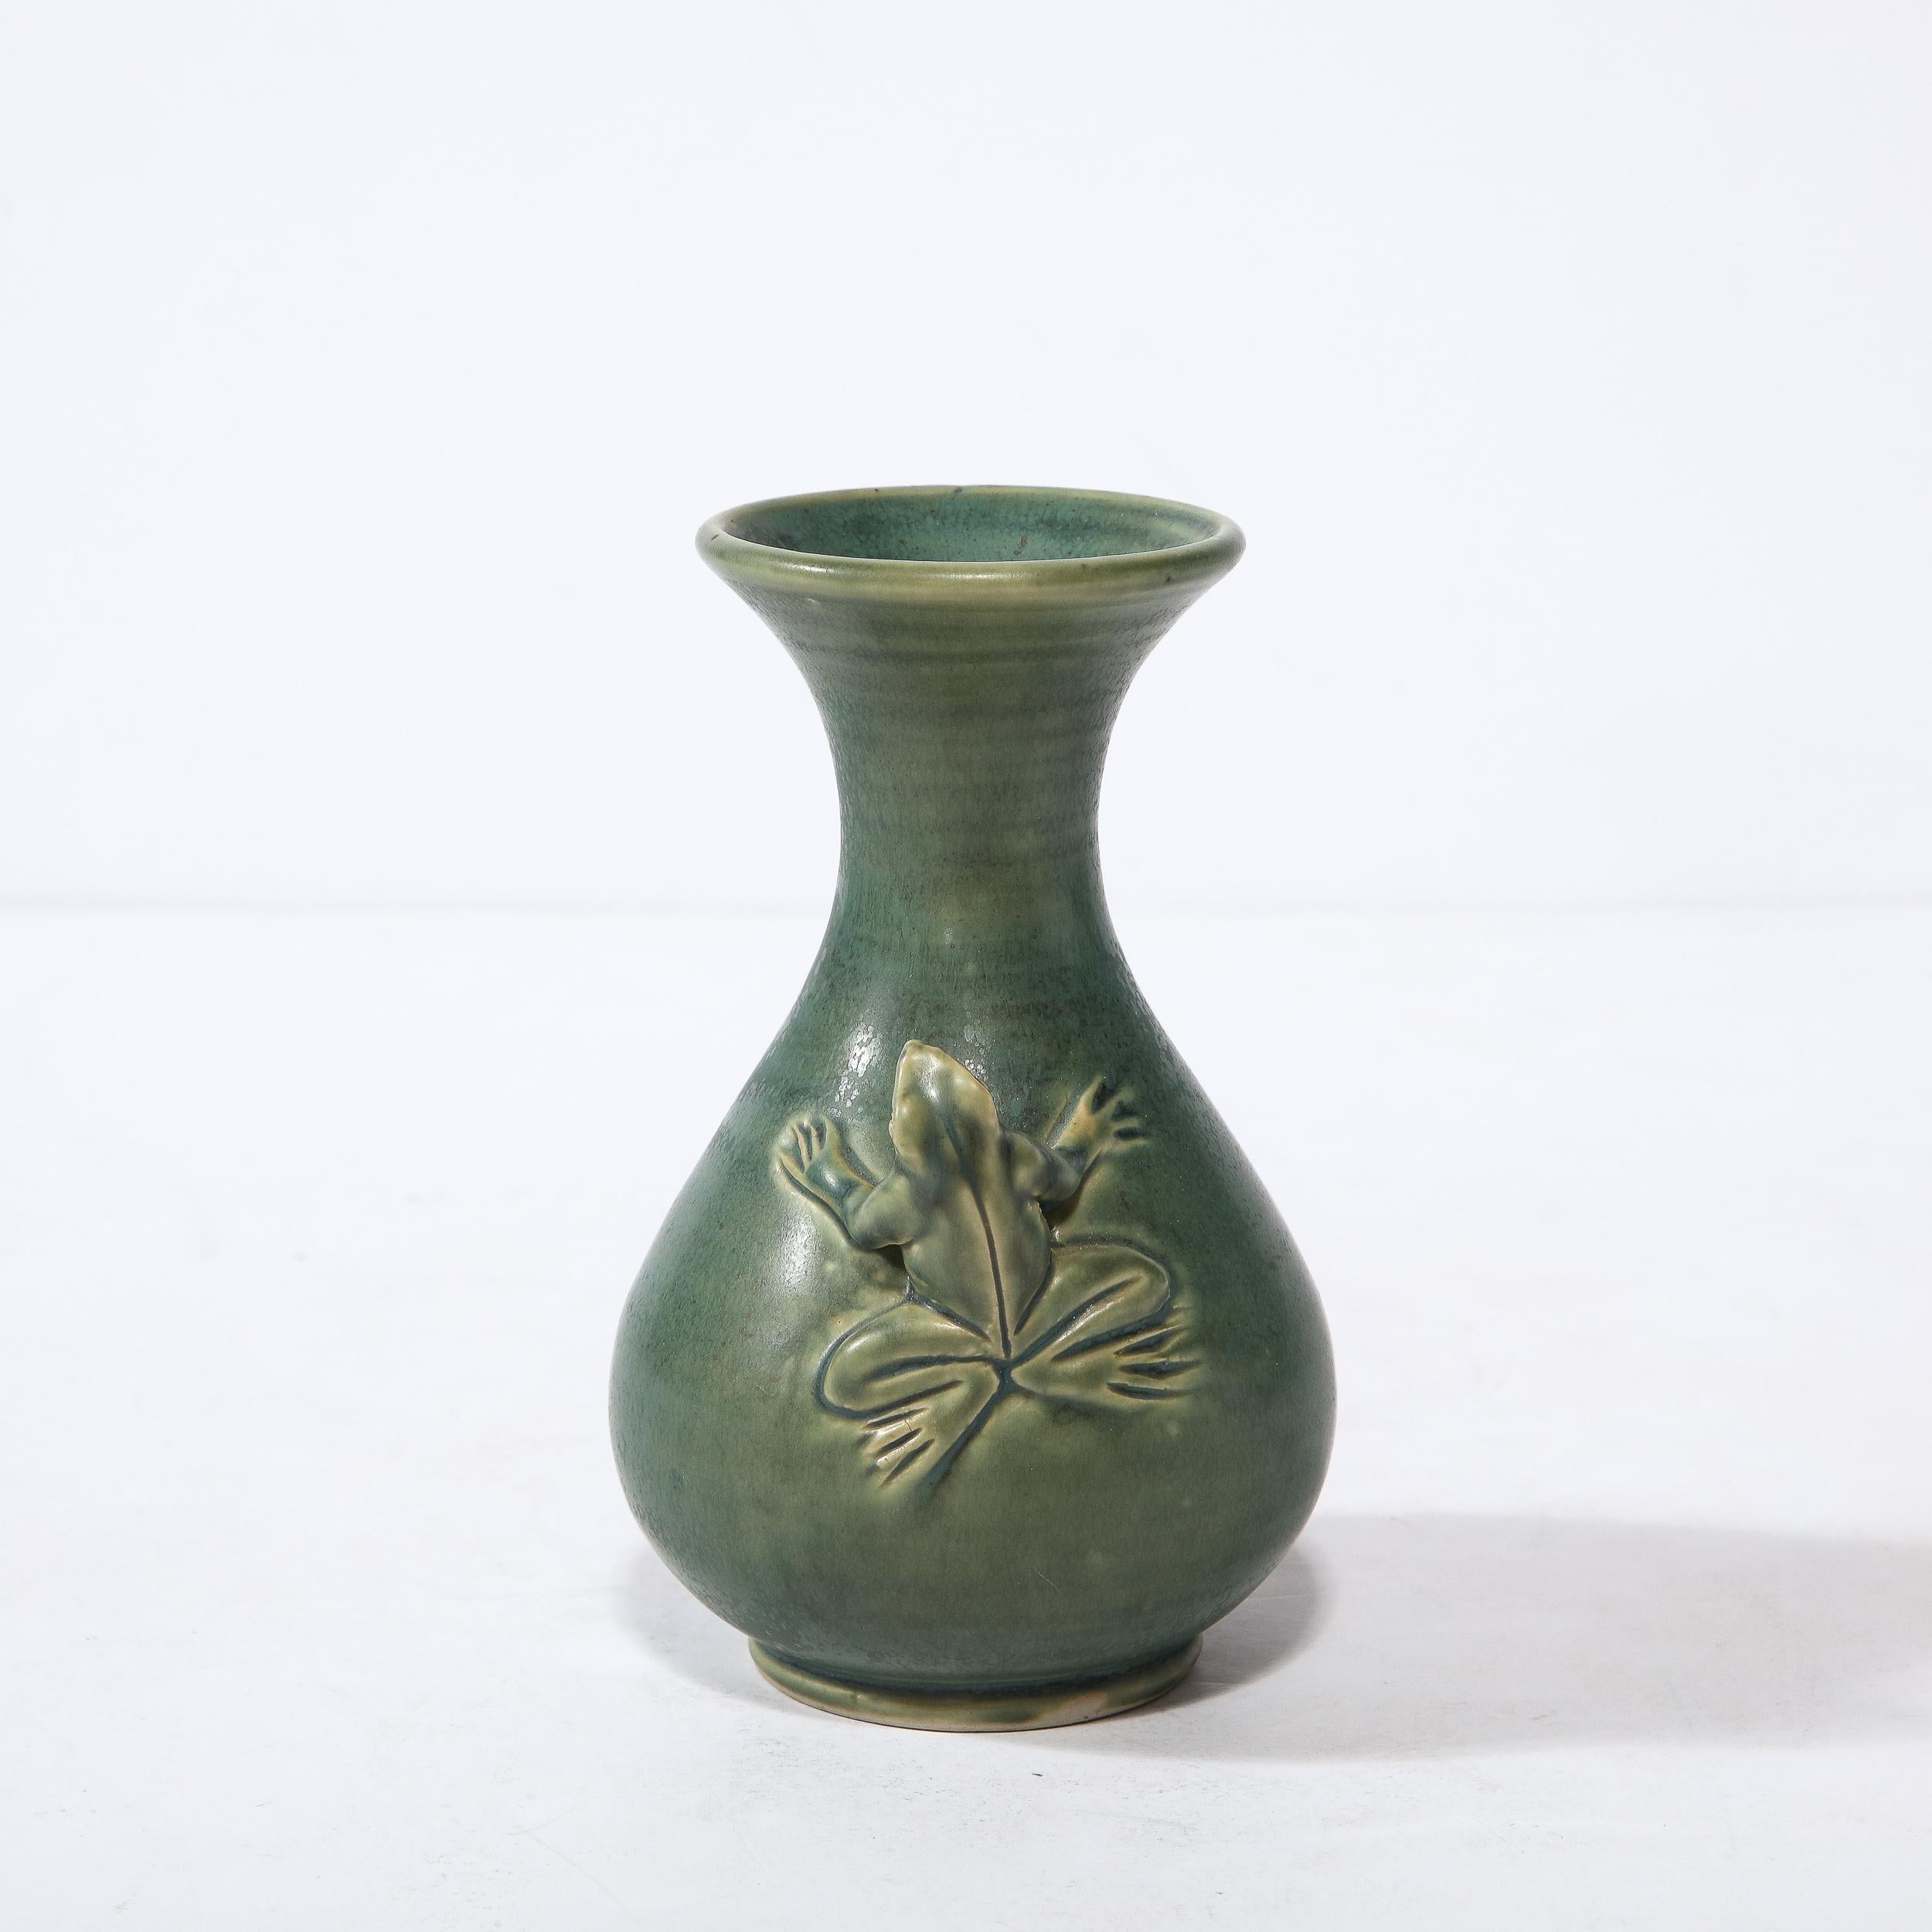 This sophisticated and whimsical modernist ceramic vase was realized in Indonesia during the latter half 20th century. It features a sculptural undulating Silhouette with a protuberant body that dramatically narrows at the neck before flaring to its